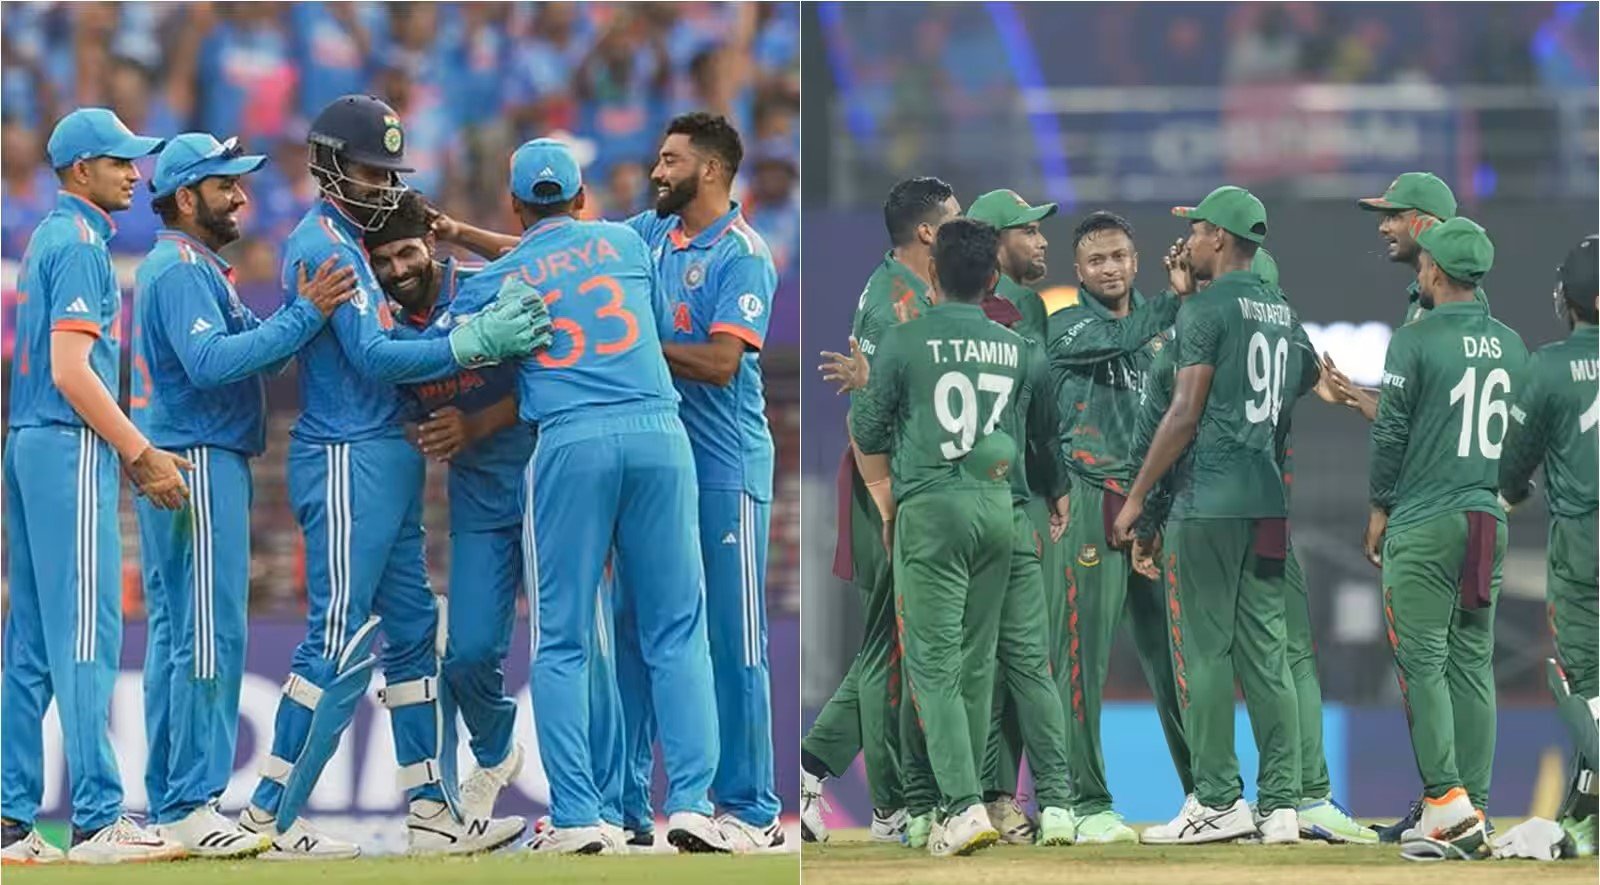 IND vs. BAN Highlights: India wins by 7 Wickets